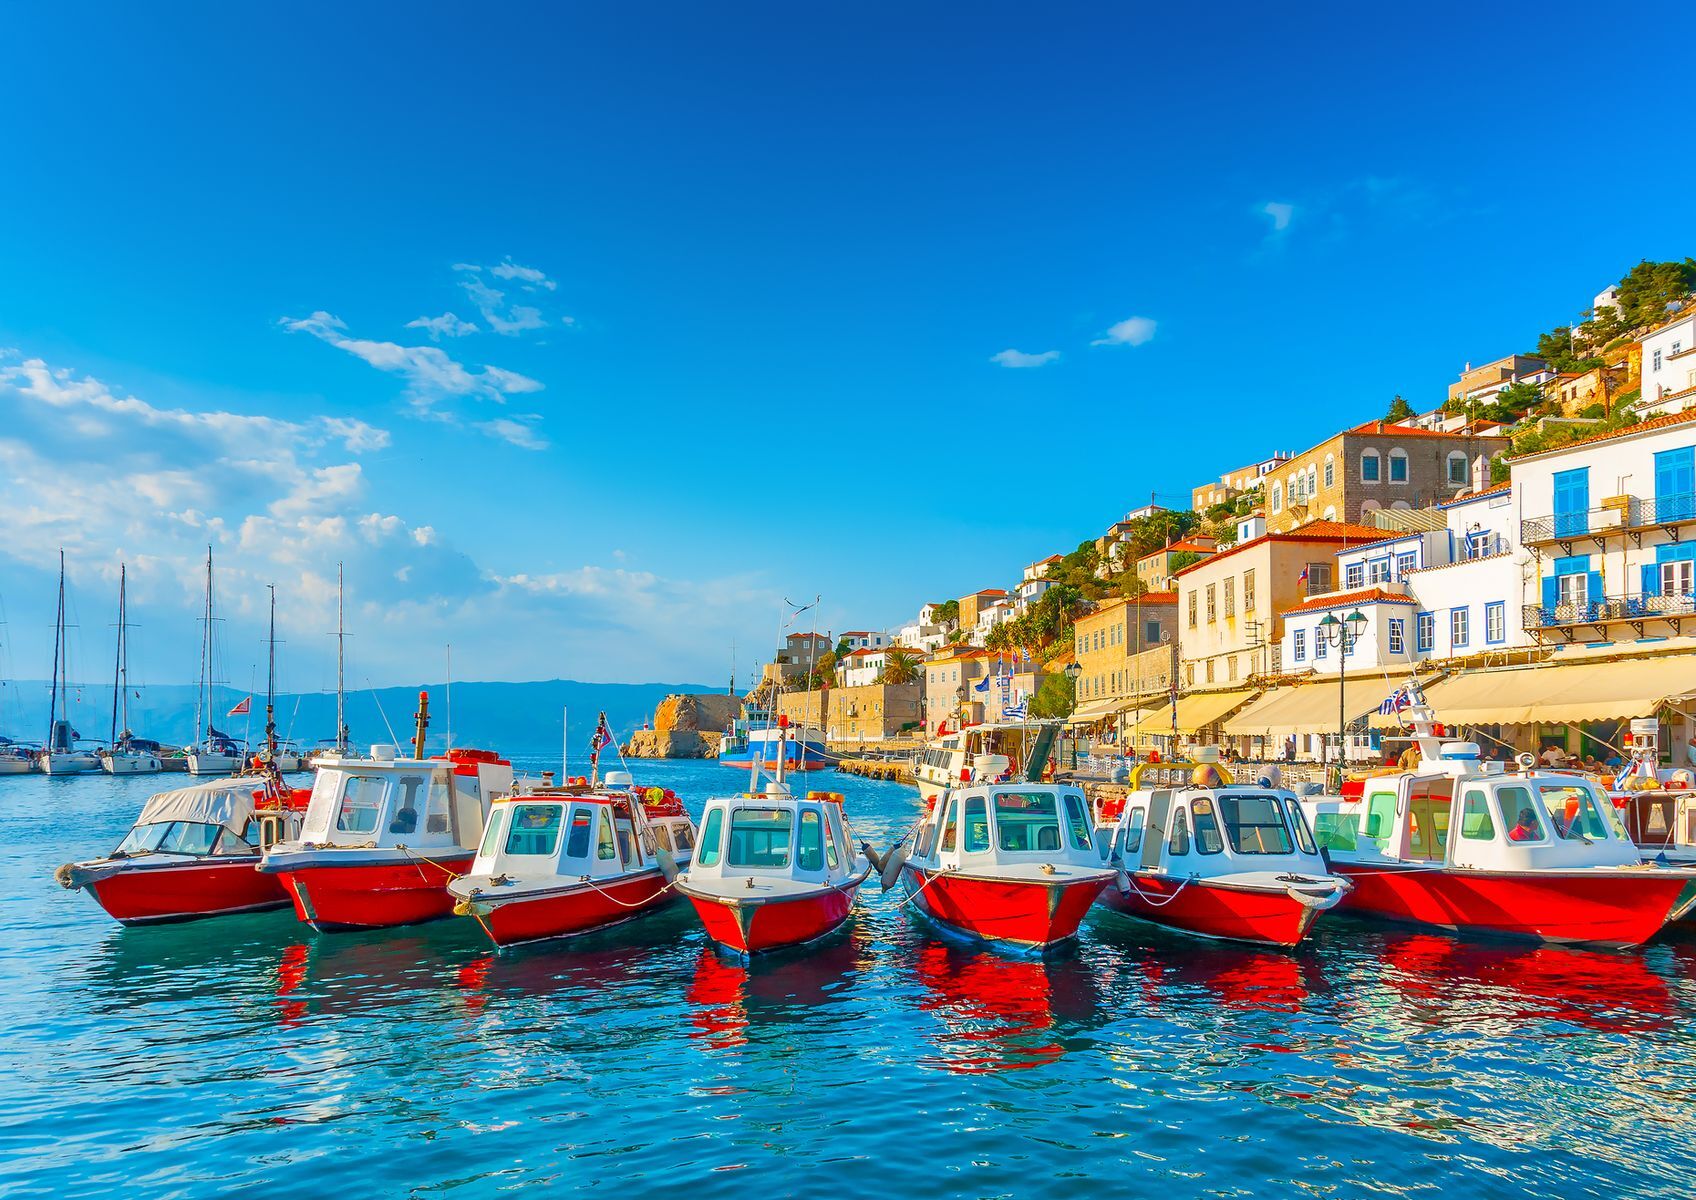 Considered one of the most beautiful <a href="https://www.greeka.com/saronic/" rel="noreferrer noopener">Saronic islands</a>, <a href="https://www.visitgreece.gr/islands/saronic-islands/hydra/" rel="noreferrer noopener">Hydra</a> offers a timeless escape with picturesque charm, car-free streets, a lively port, and bucolic whitewashed houses. Explore the <a href="https://www.greeka.com/saronic/hydra/sightseeing/monastery-prophet-elias/" rel="noreferrer noopener">Monastery of Prophet Elias</a> or relax on <a href="https://www.greeka.com/saronic/hydra/beaches/" rel="noreferrer noopener">pebble beaches</a> beside crystal-clear waters. Indeed, Hydra is sure to please naval history buffs, artists seeking inspiration, and travellers looking for a peaceful escape.